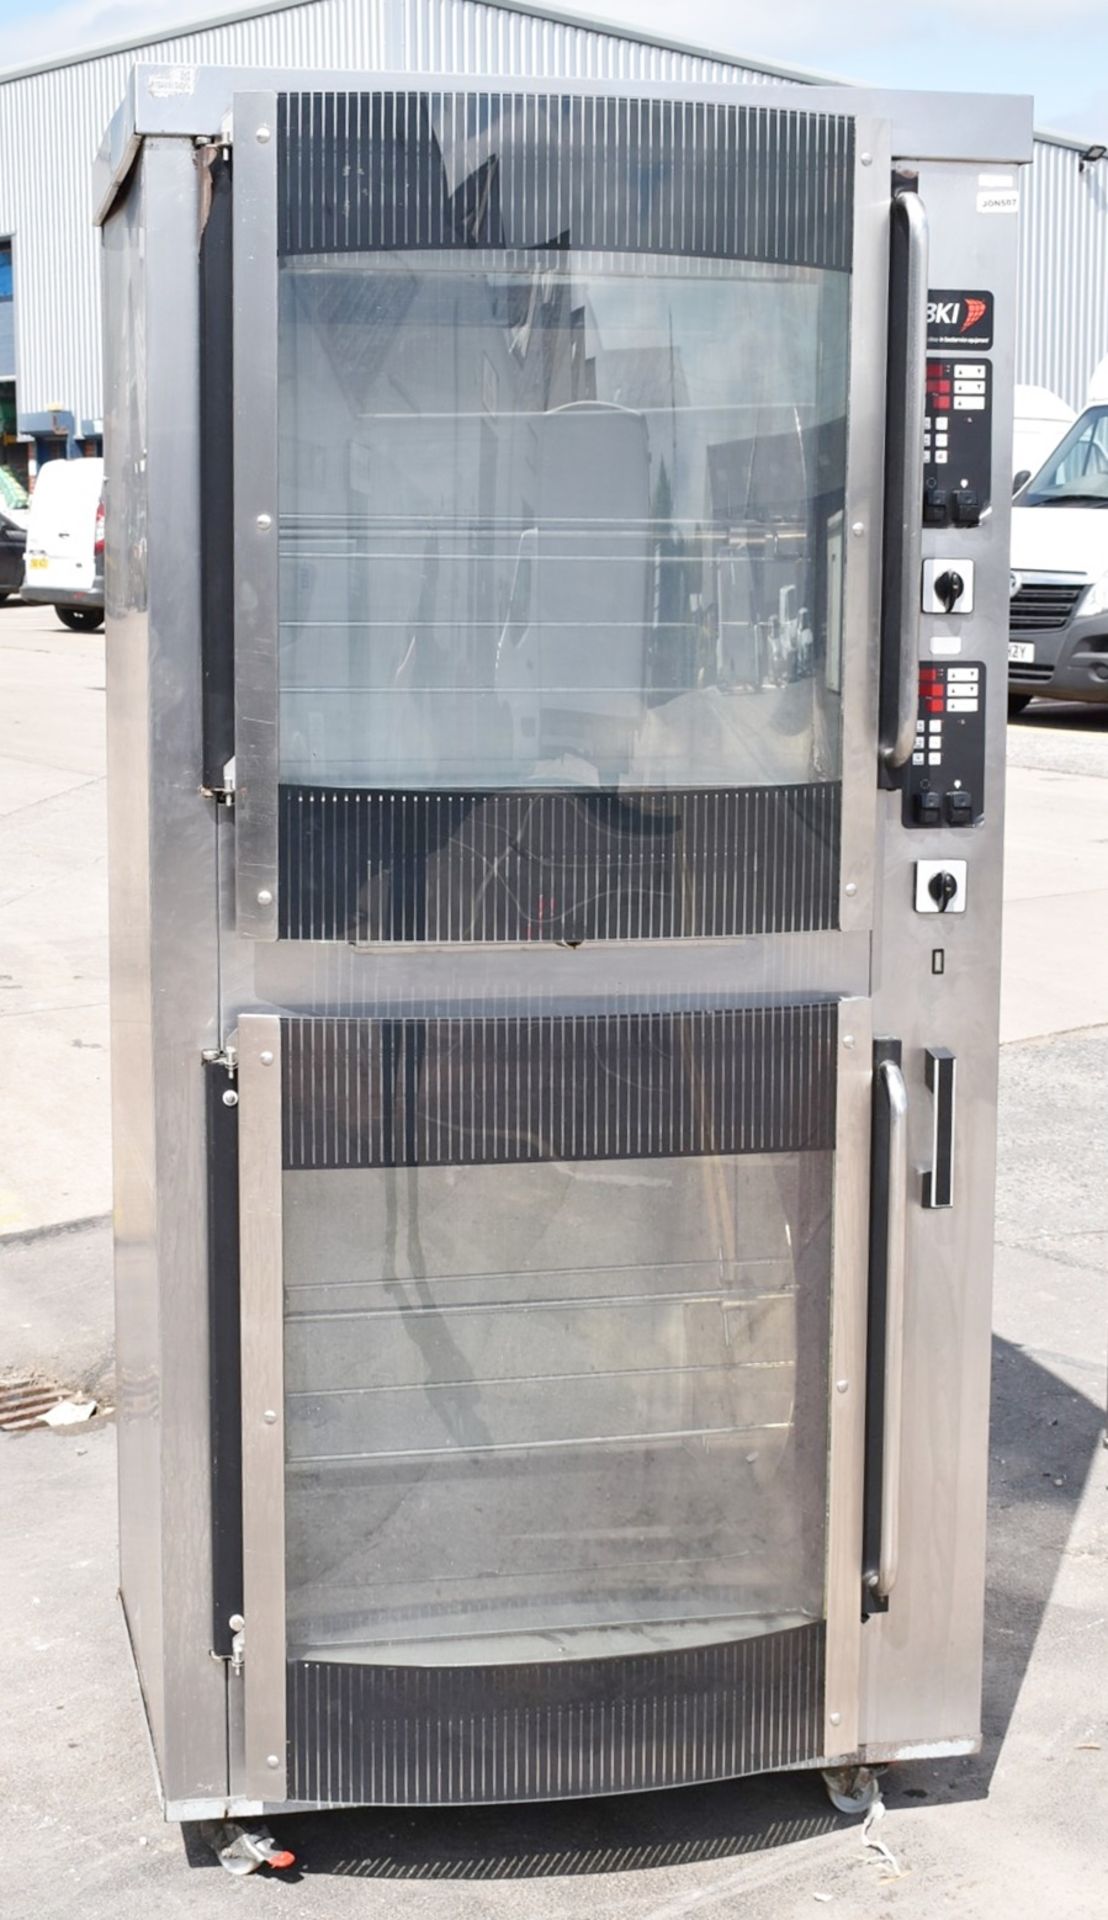 1 x BKI BBQ King Commercial Double Rotisserie Chicken Oven With Stand - Type VGUK16 - 3 Phase